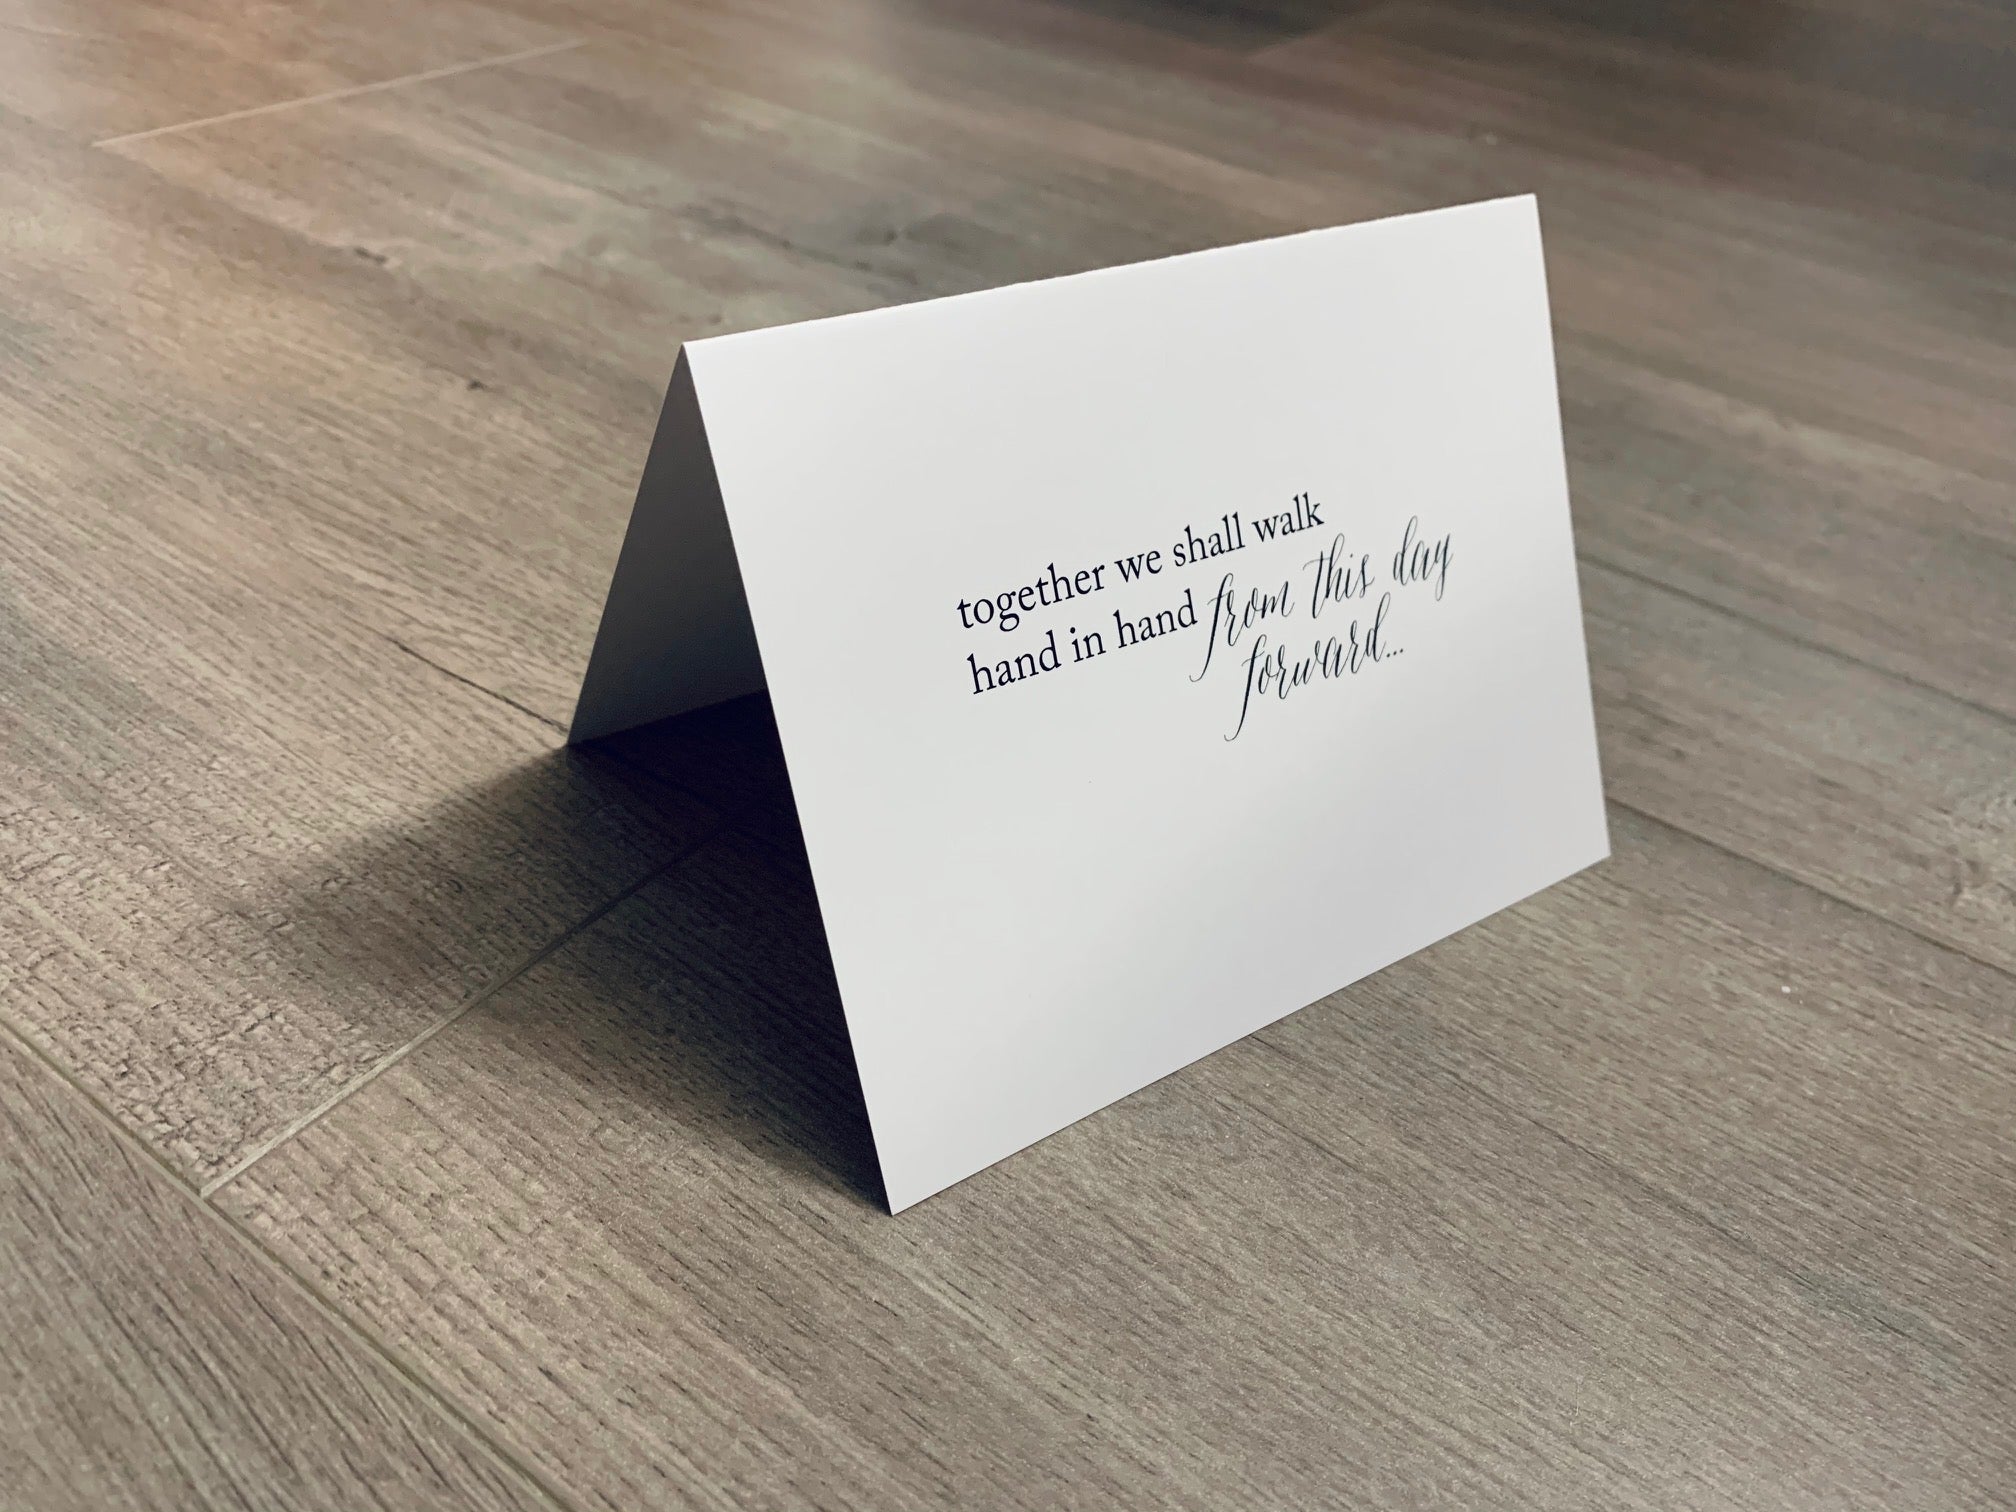 A white, folded notecard is propped up on a gray wooden floor. The card says, "together we shall walk hand in hand from this day forward..." in black ink. Stationare's Bridal and Wedding collection.